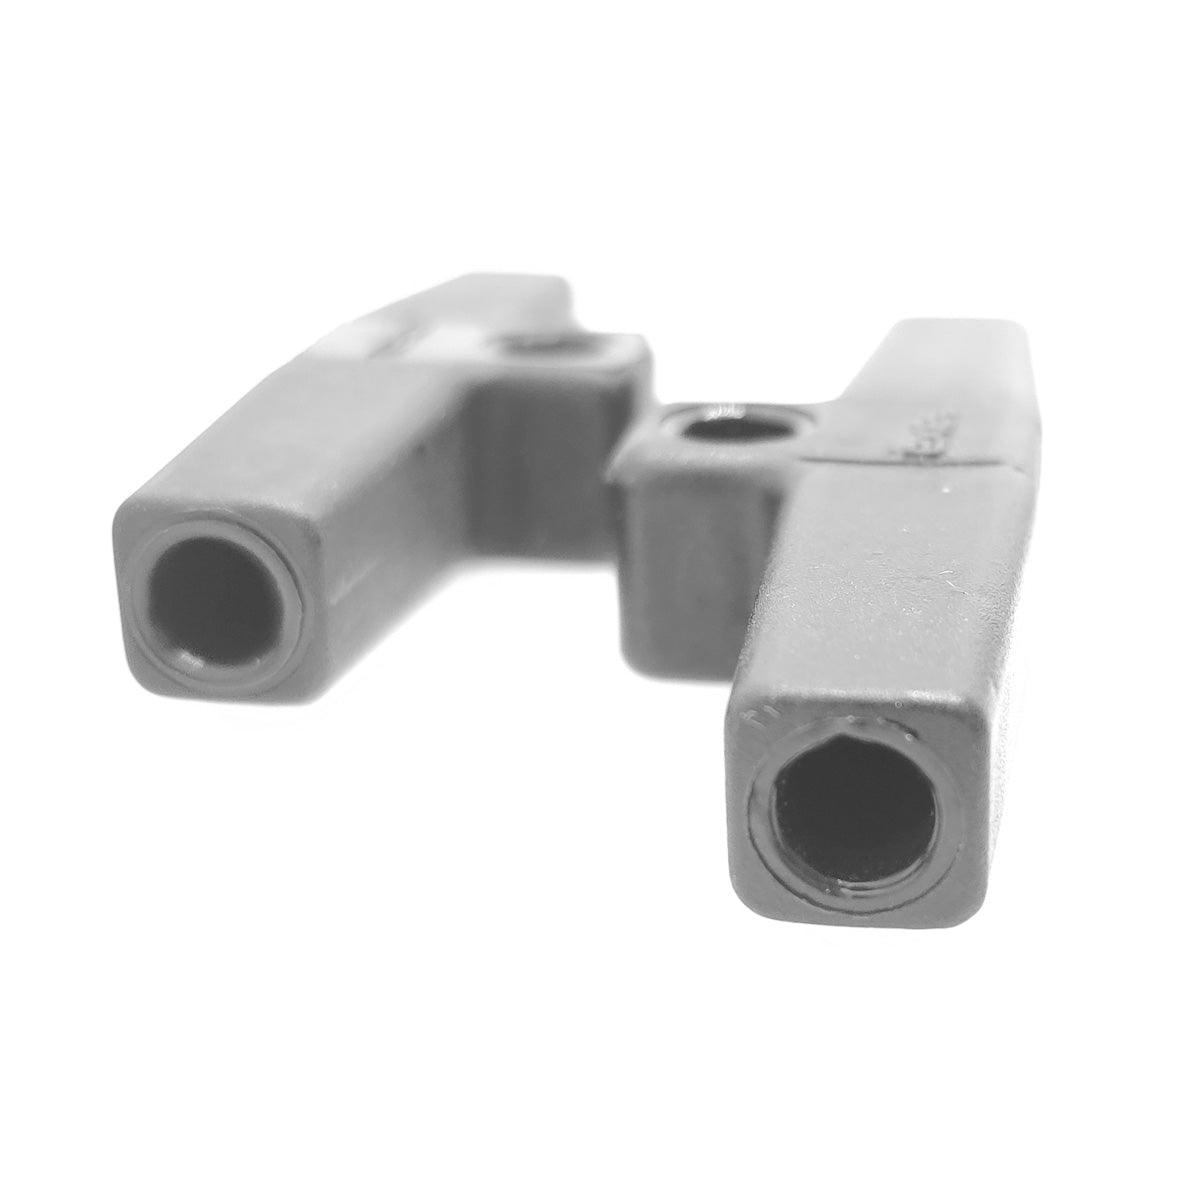 Exel Centre T-Joint Connector - Kiteshop.com